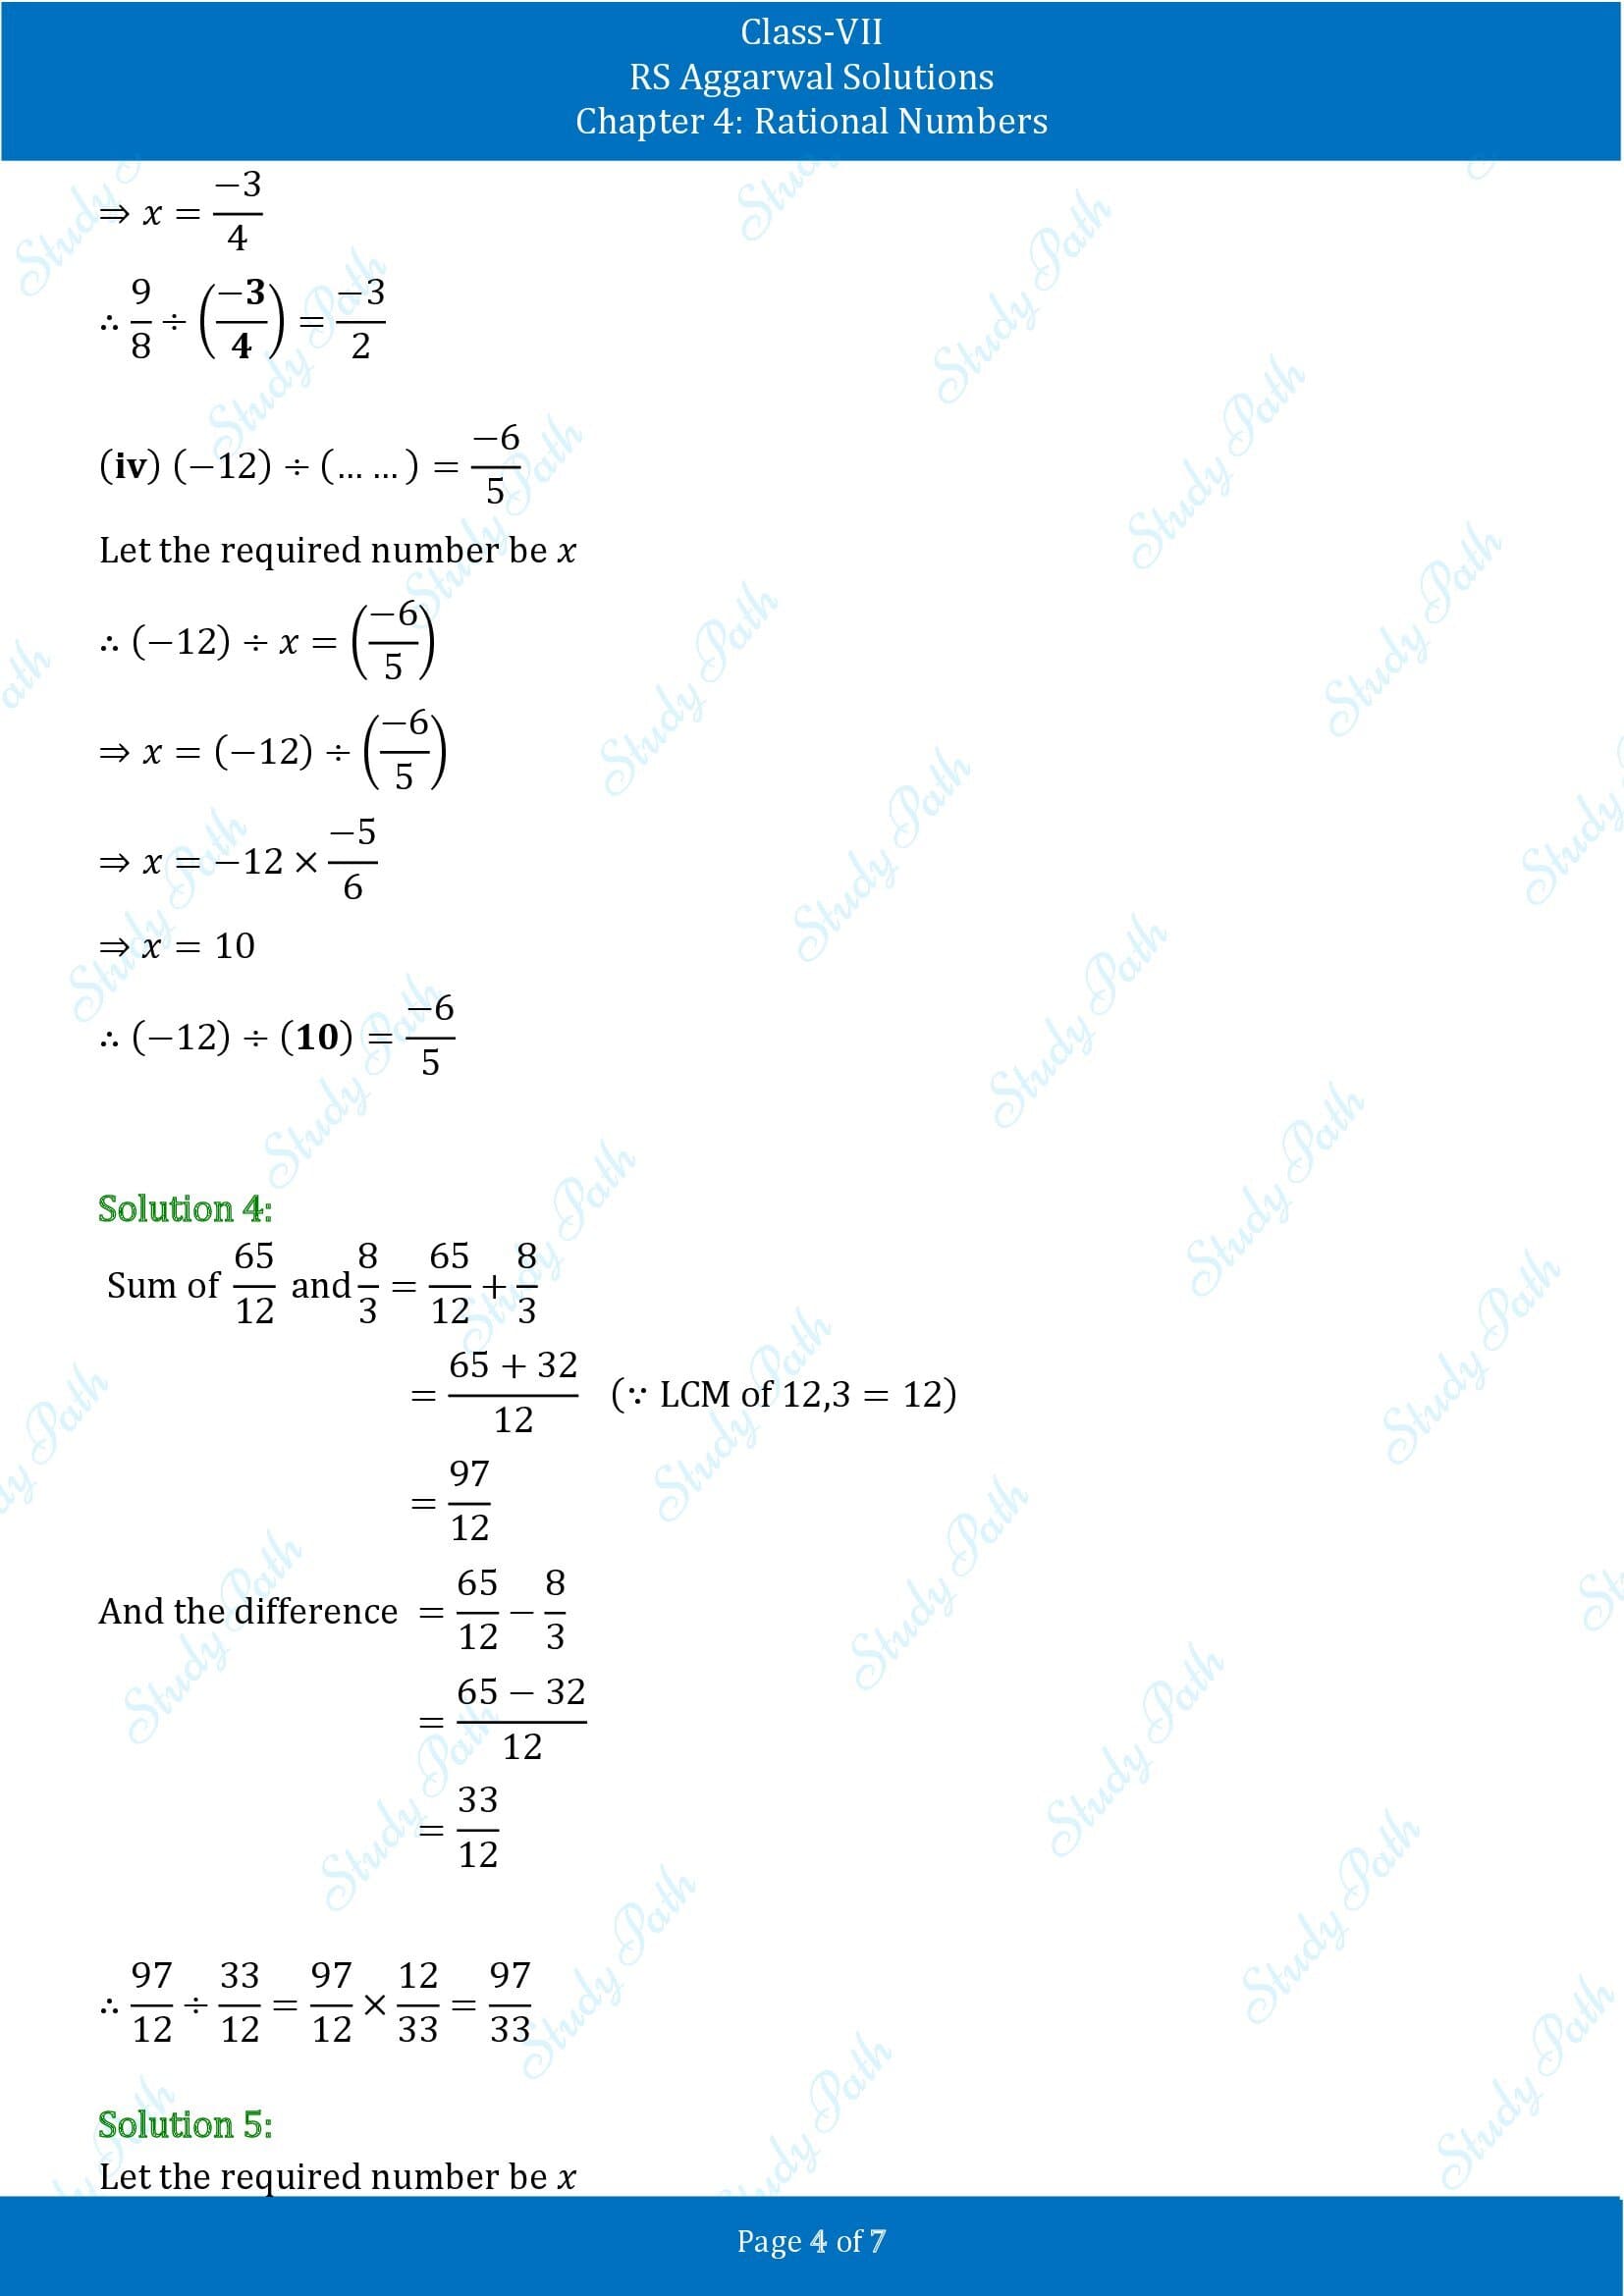 RS Aggarwal Solutions Class 7 Chapter 4 Rational Numbers Exercise 4F 00004